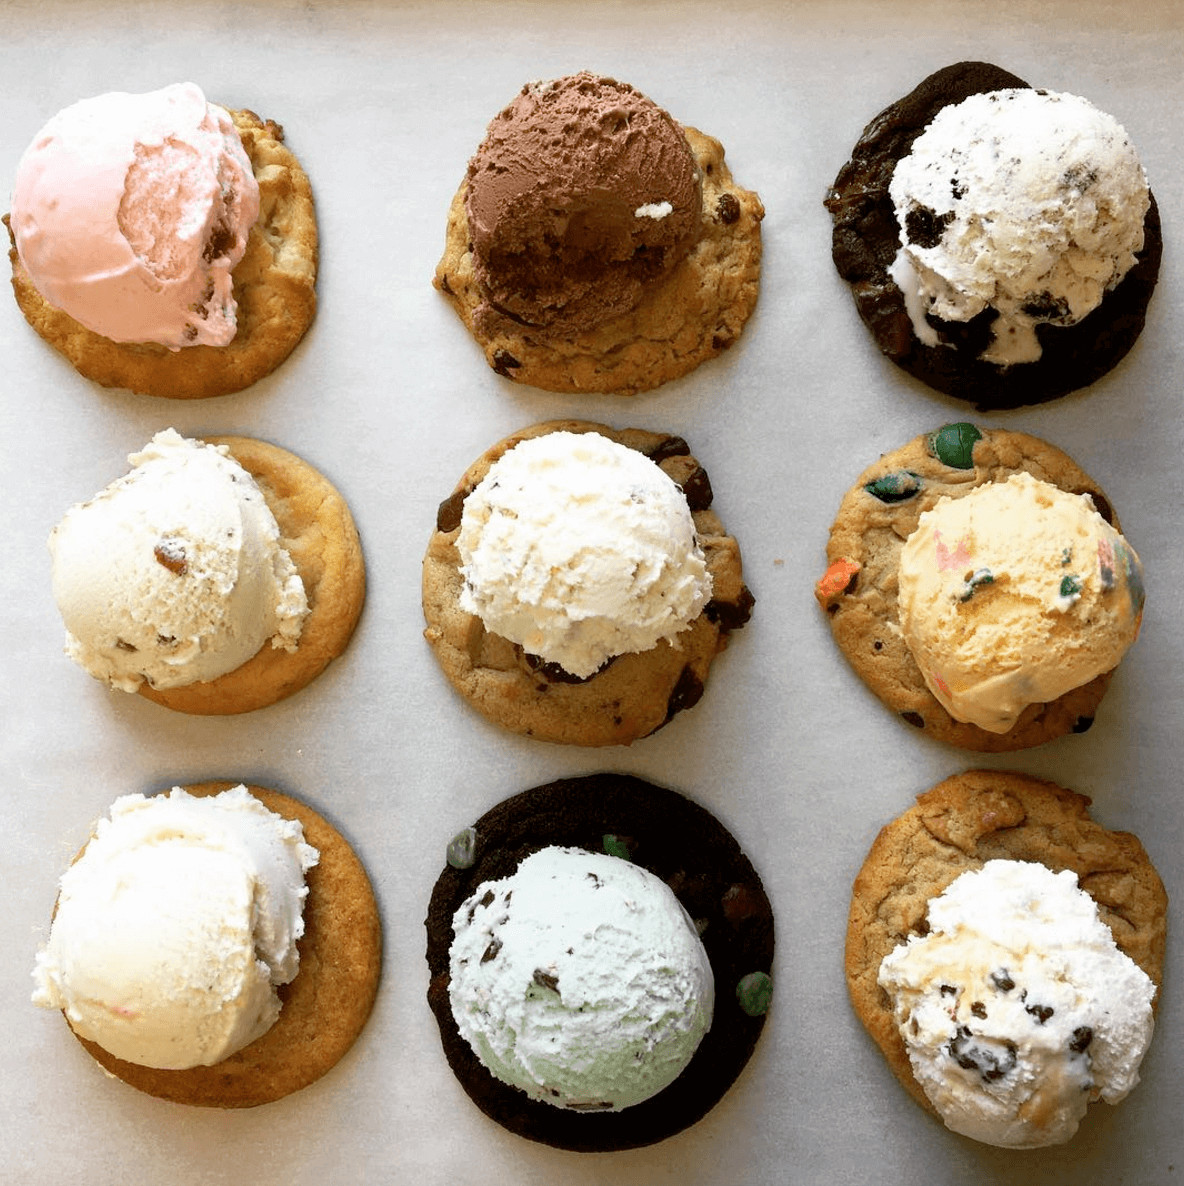 Best Desserts Nyc
 Desserts in New York 10 You Need to Try